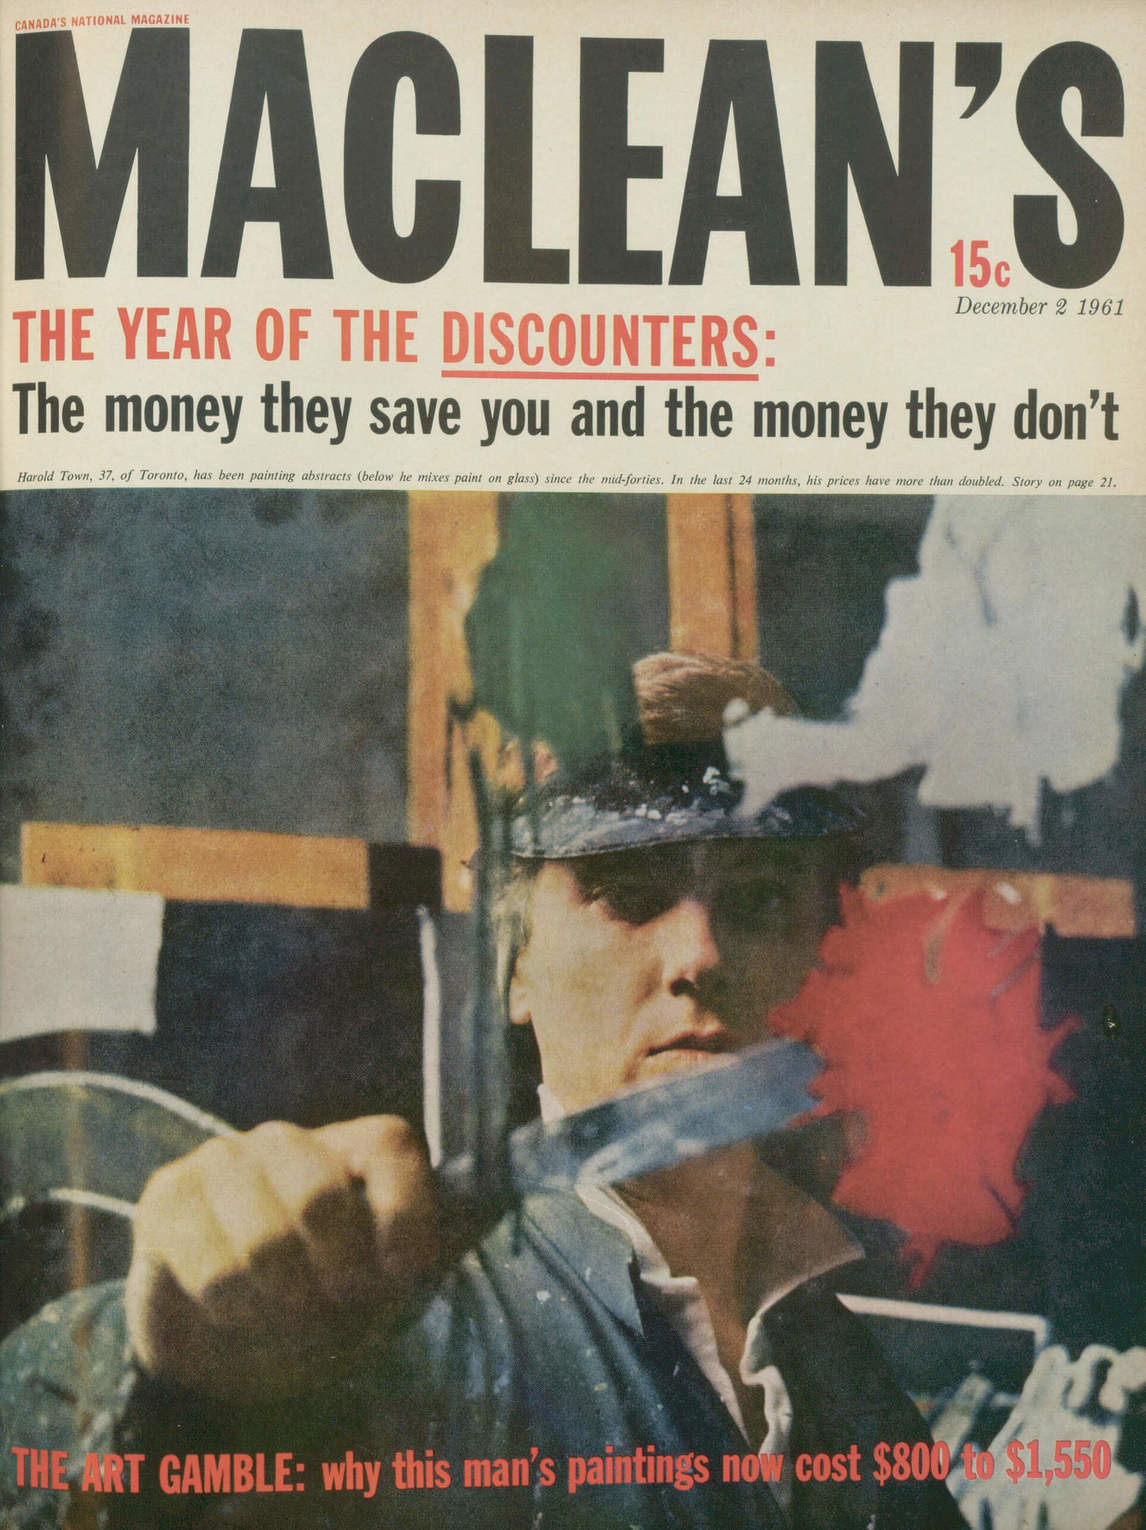 Art Canada Institute, Harold Town on the cover of Maclean’s magazine, December 1961